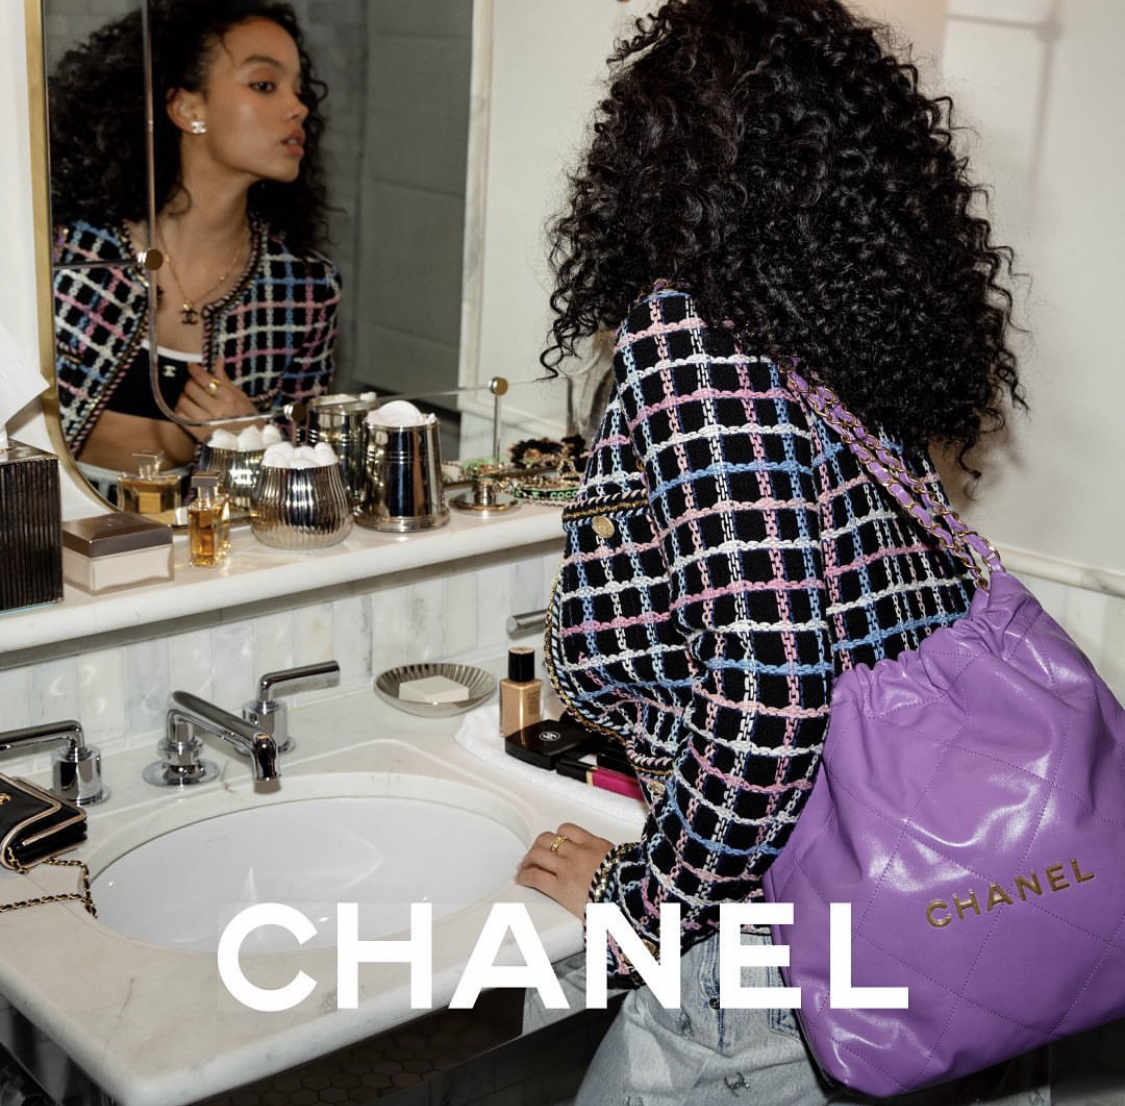 22 reasons to love the Chanel 22 Bag